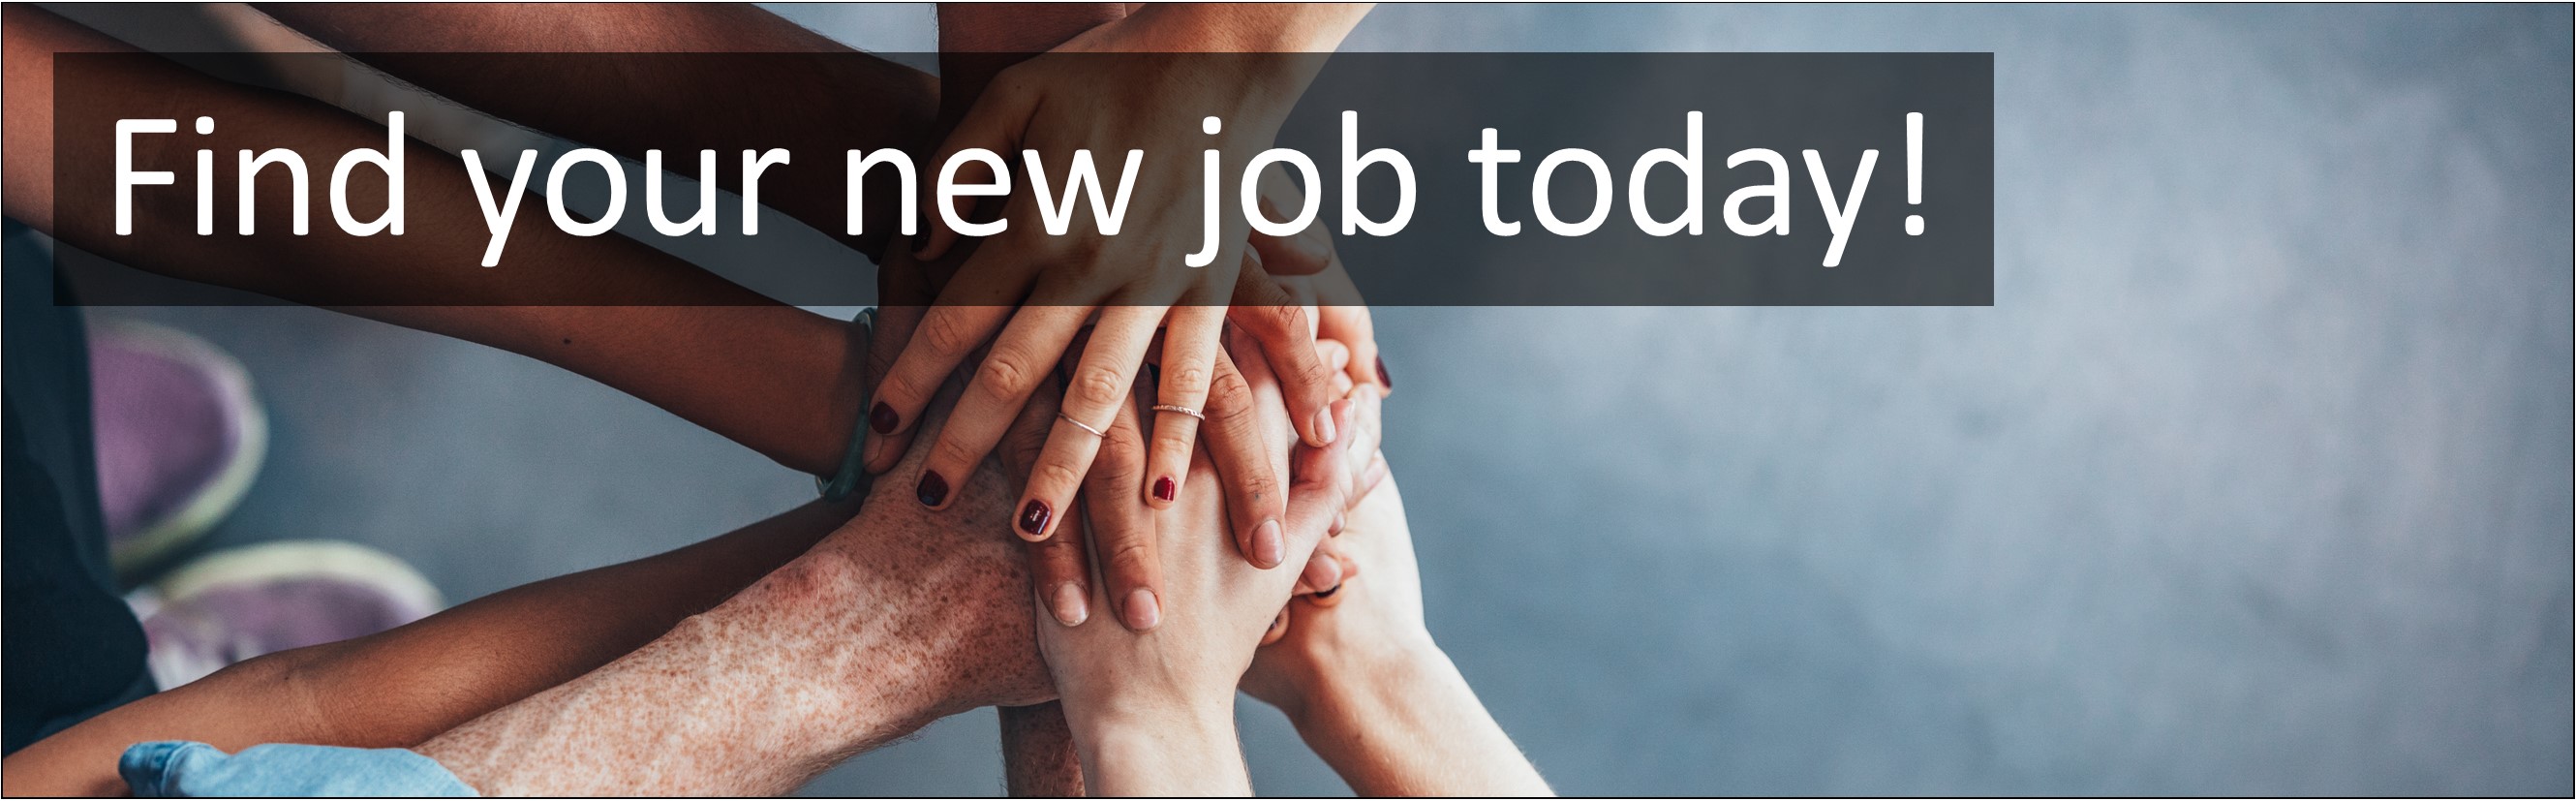 Social Care Jobs. Residential Support Worker Jobs, Careers & Vacancies in Newcastle, Tyne and Wear, North East England Advertised by AWD online – Multi-Job Board Advertising and CV Sourcing Recruitment Services